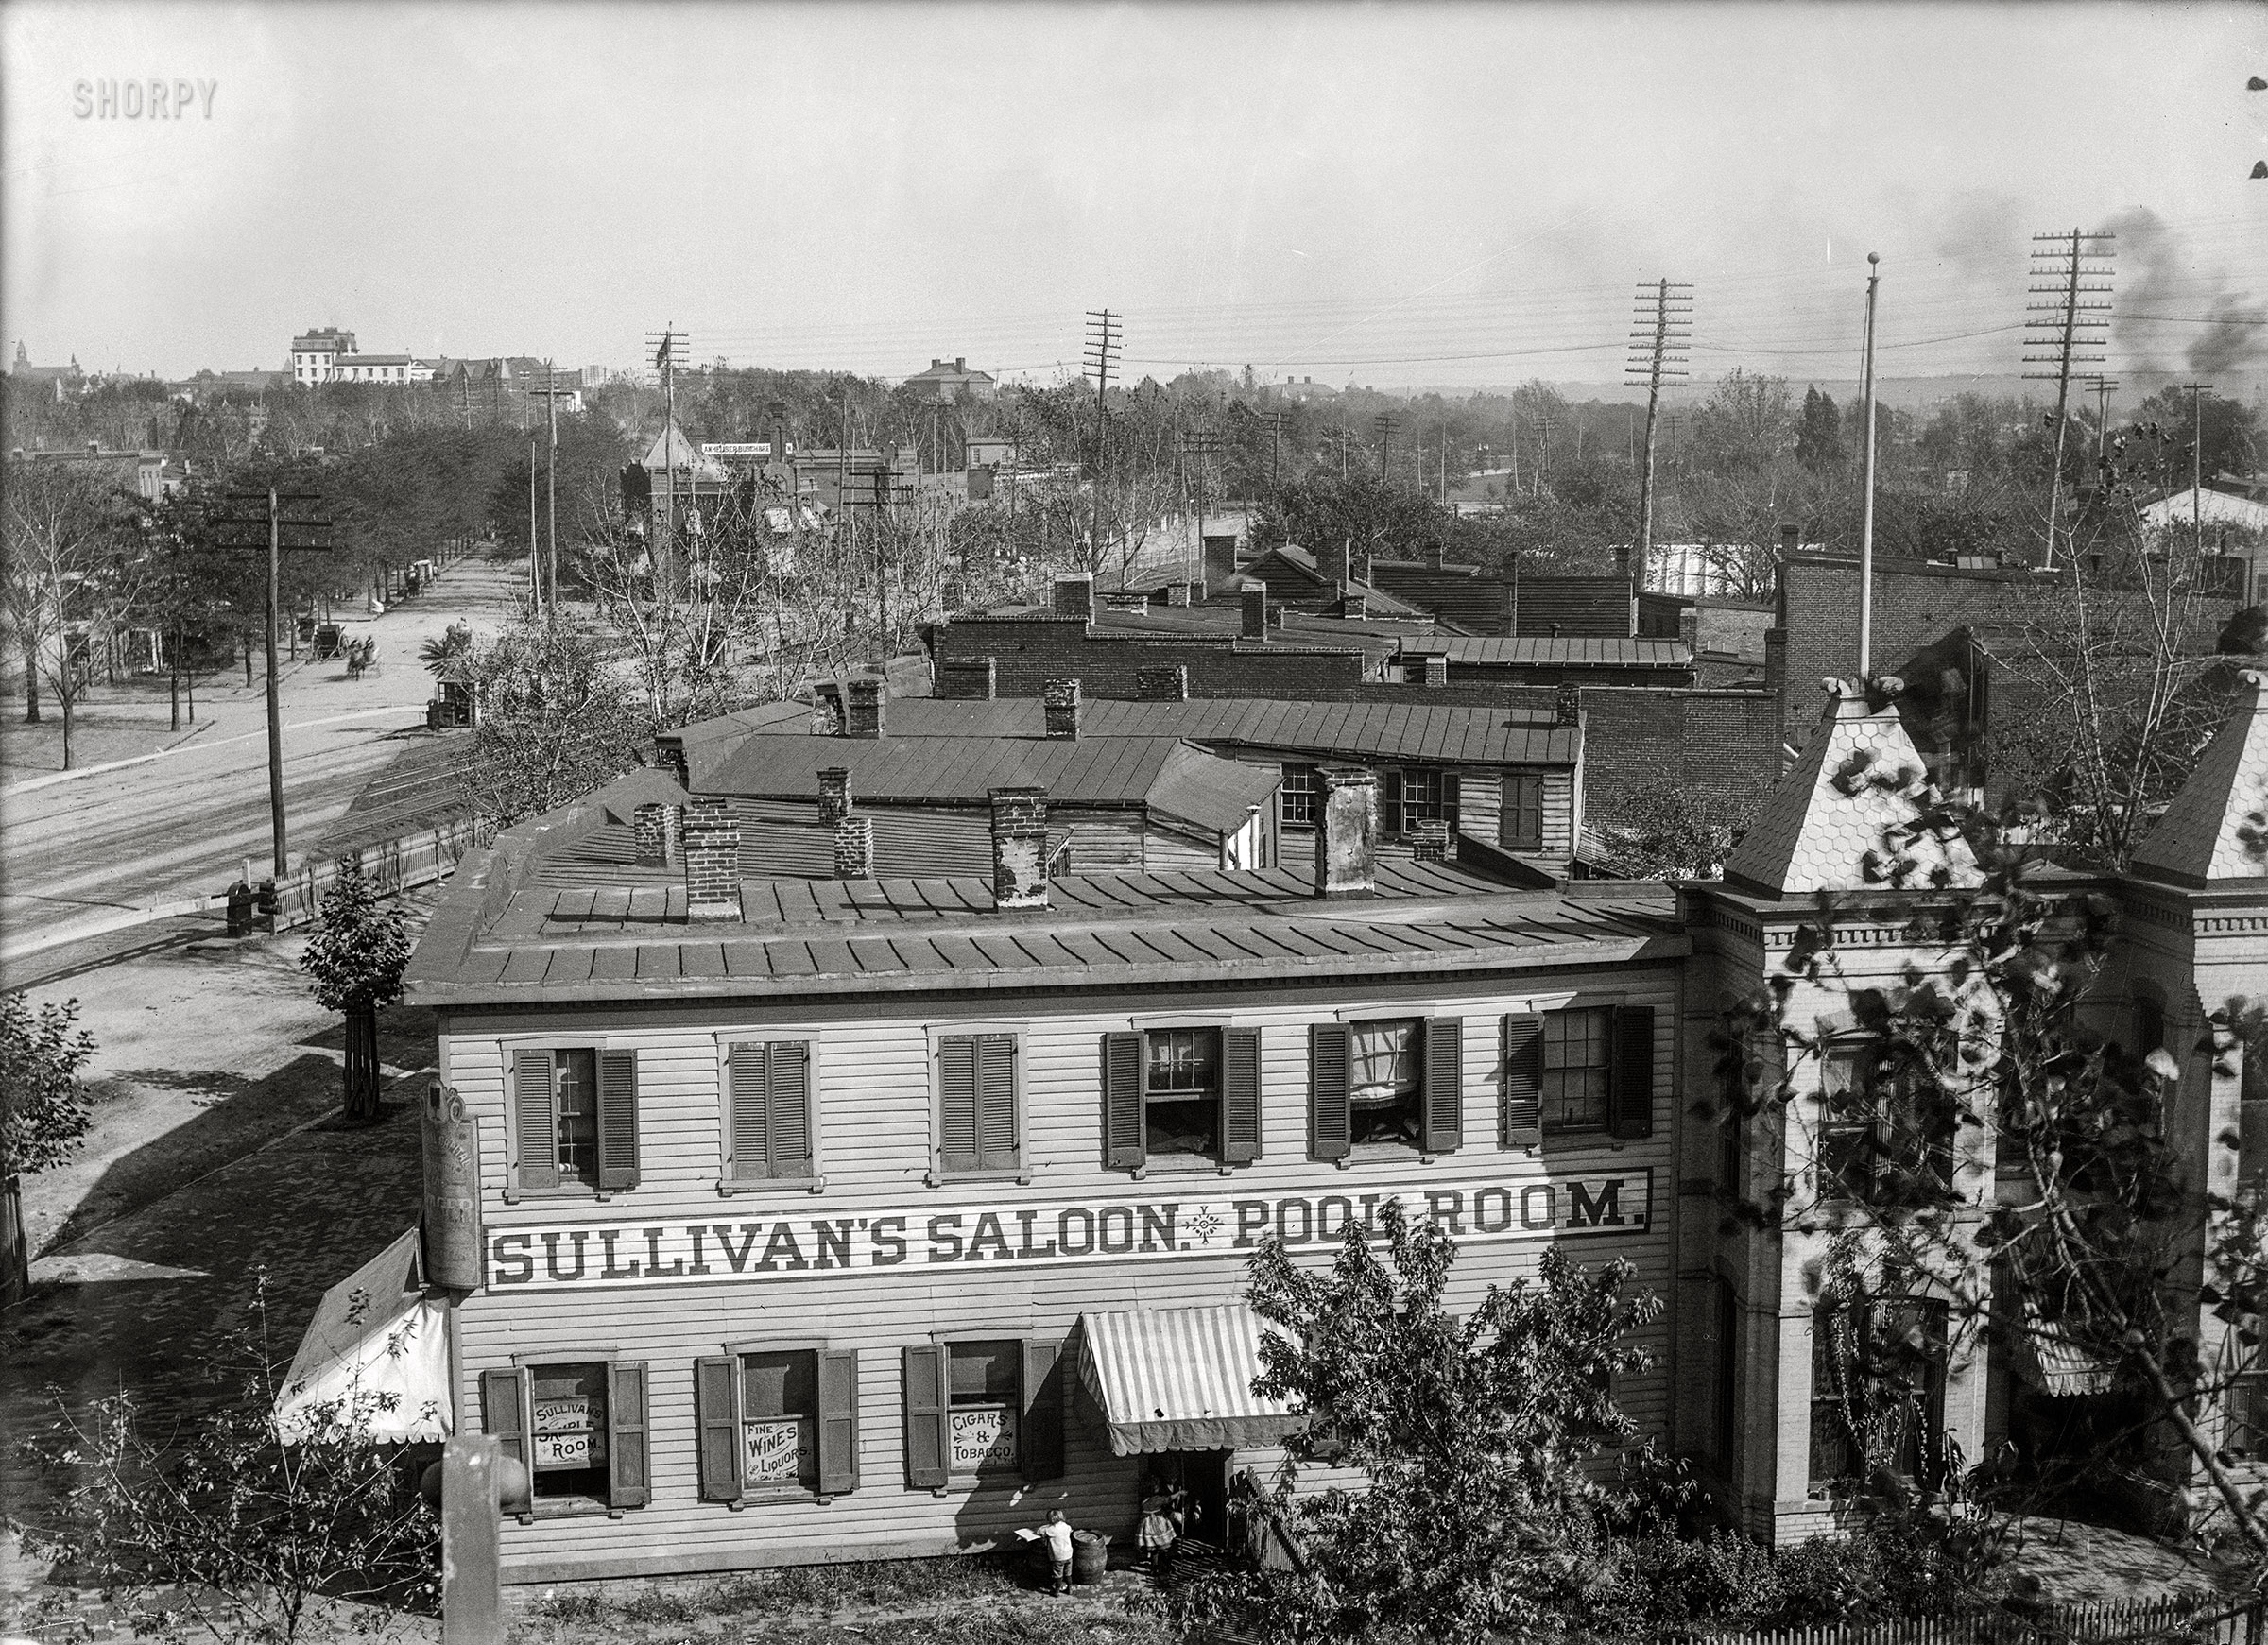 Washington, D.C., circa 1901. "Elevated view of Virginia Avenue S.W. at E Street, showing Sullivan's Saloon & Pool Room." 5x7 glass negative from the D.C. Street Survey. View full size.